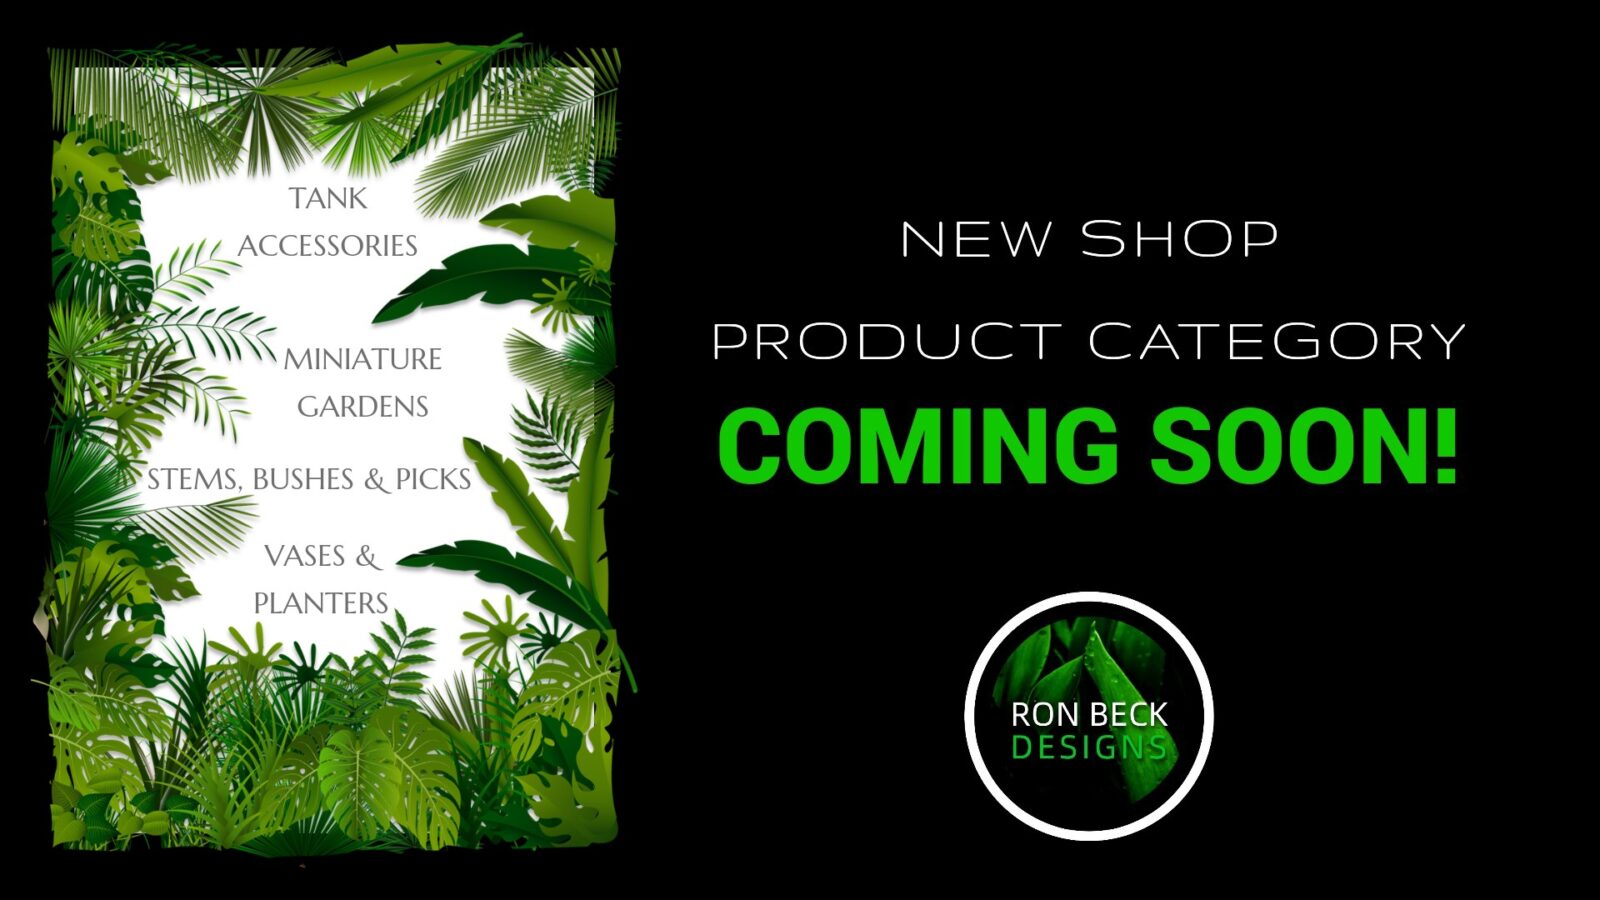 Coming Soon - New Product Categories - Ron Beck Designs 1920 1080